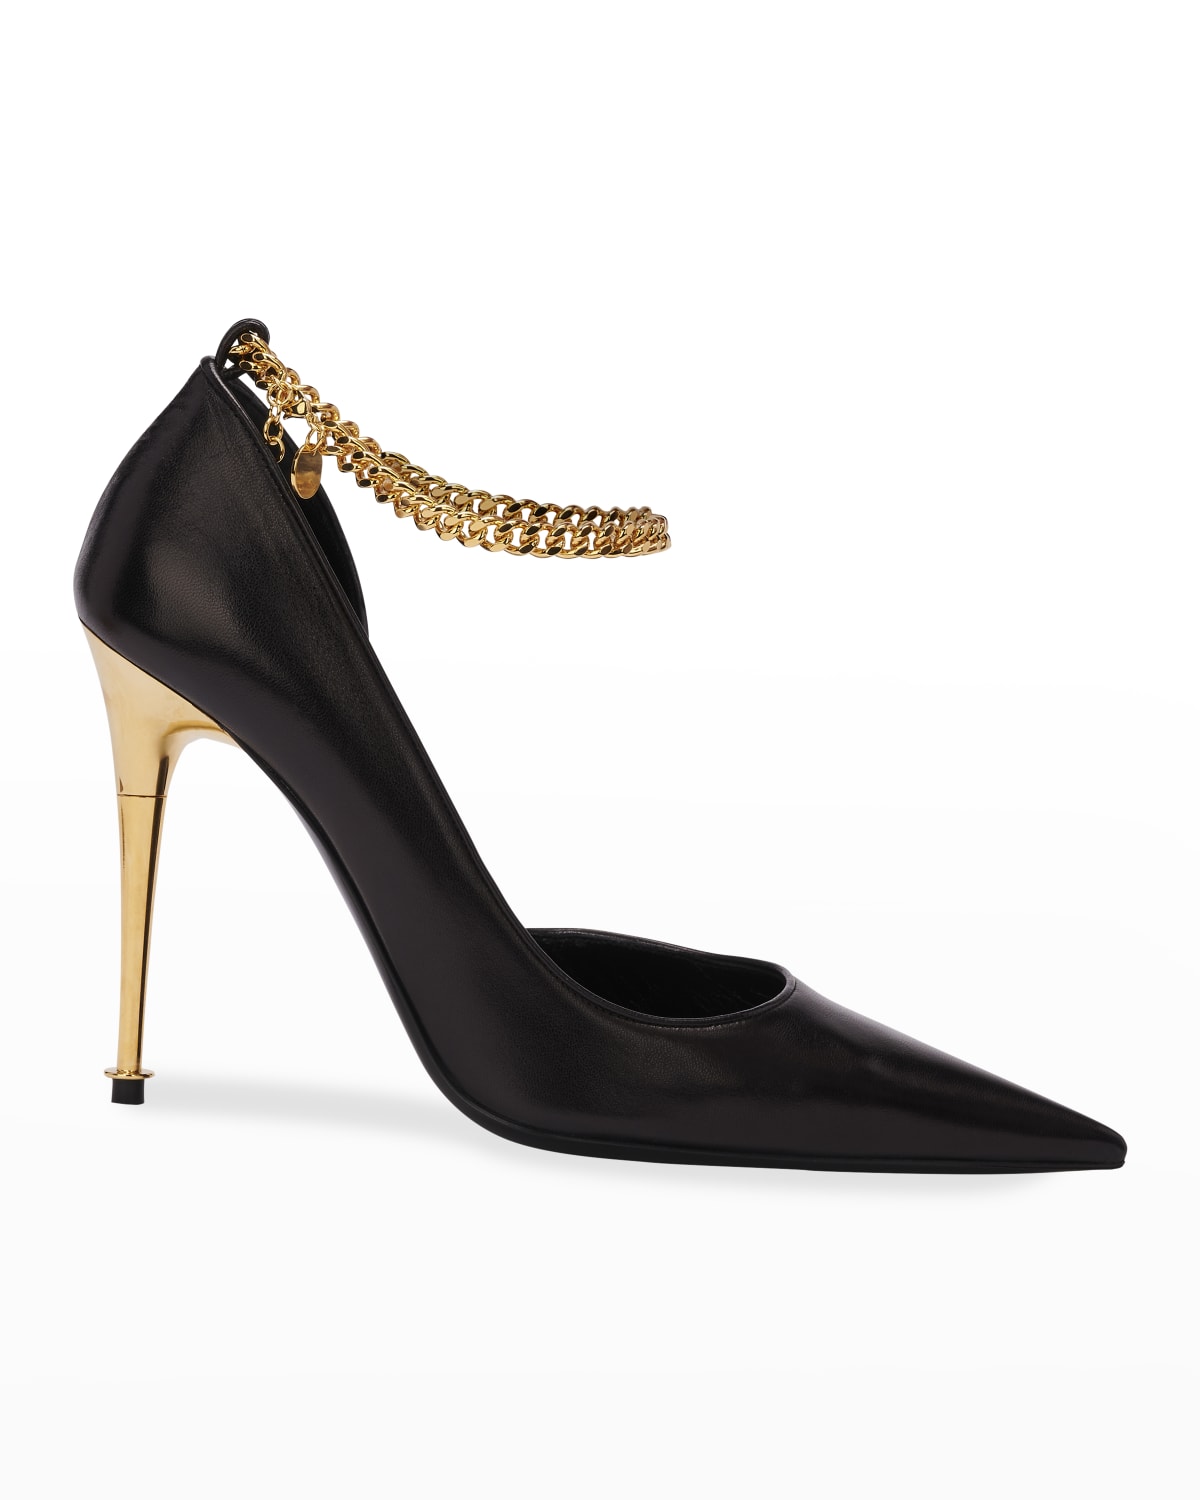 Tom Ford Black Shoes | Neiman Marcus